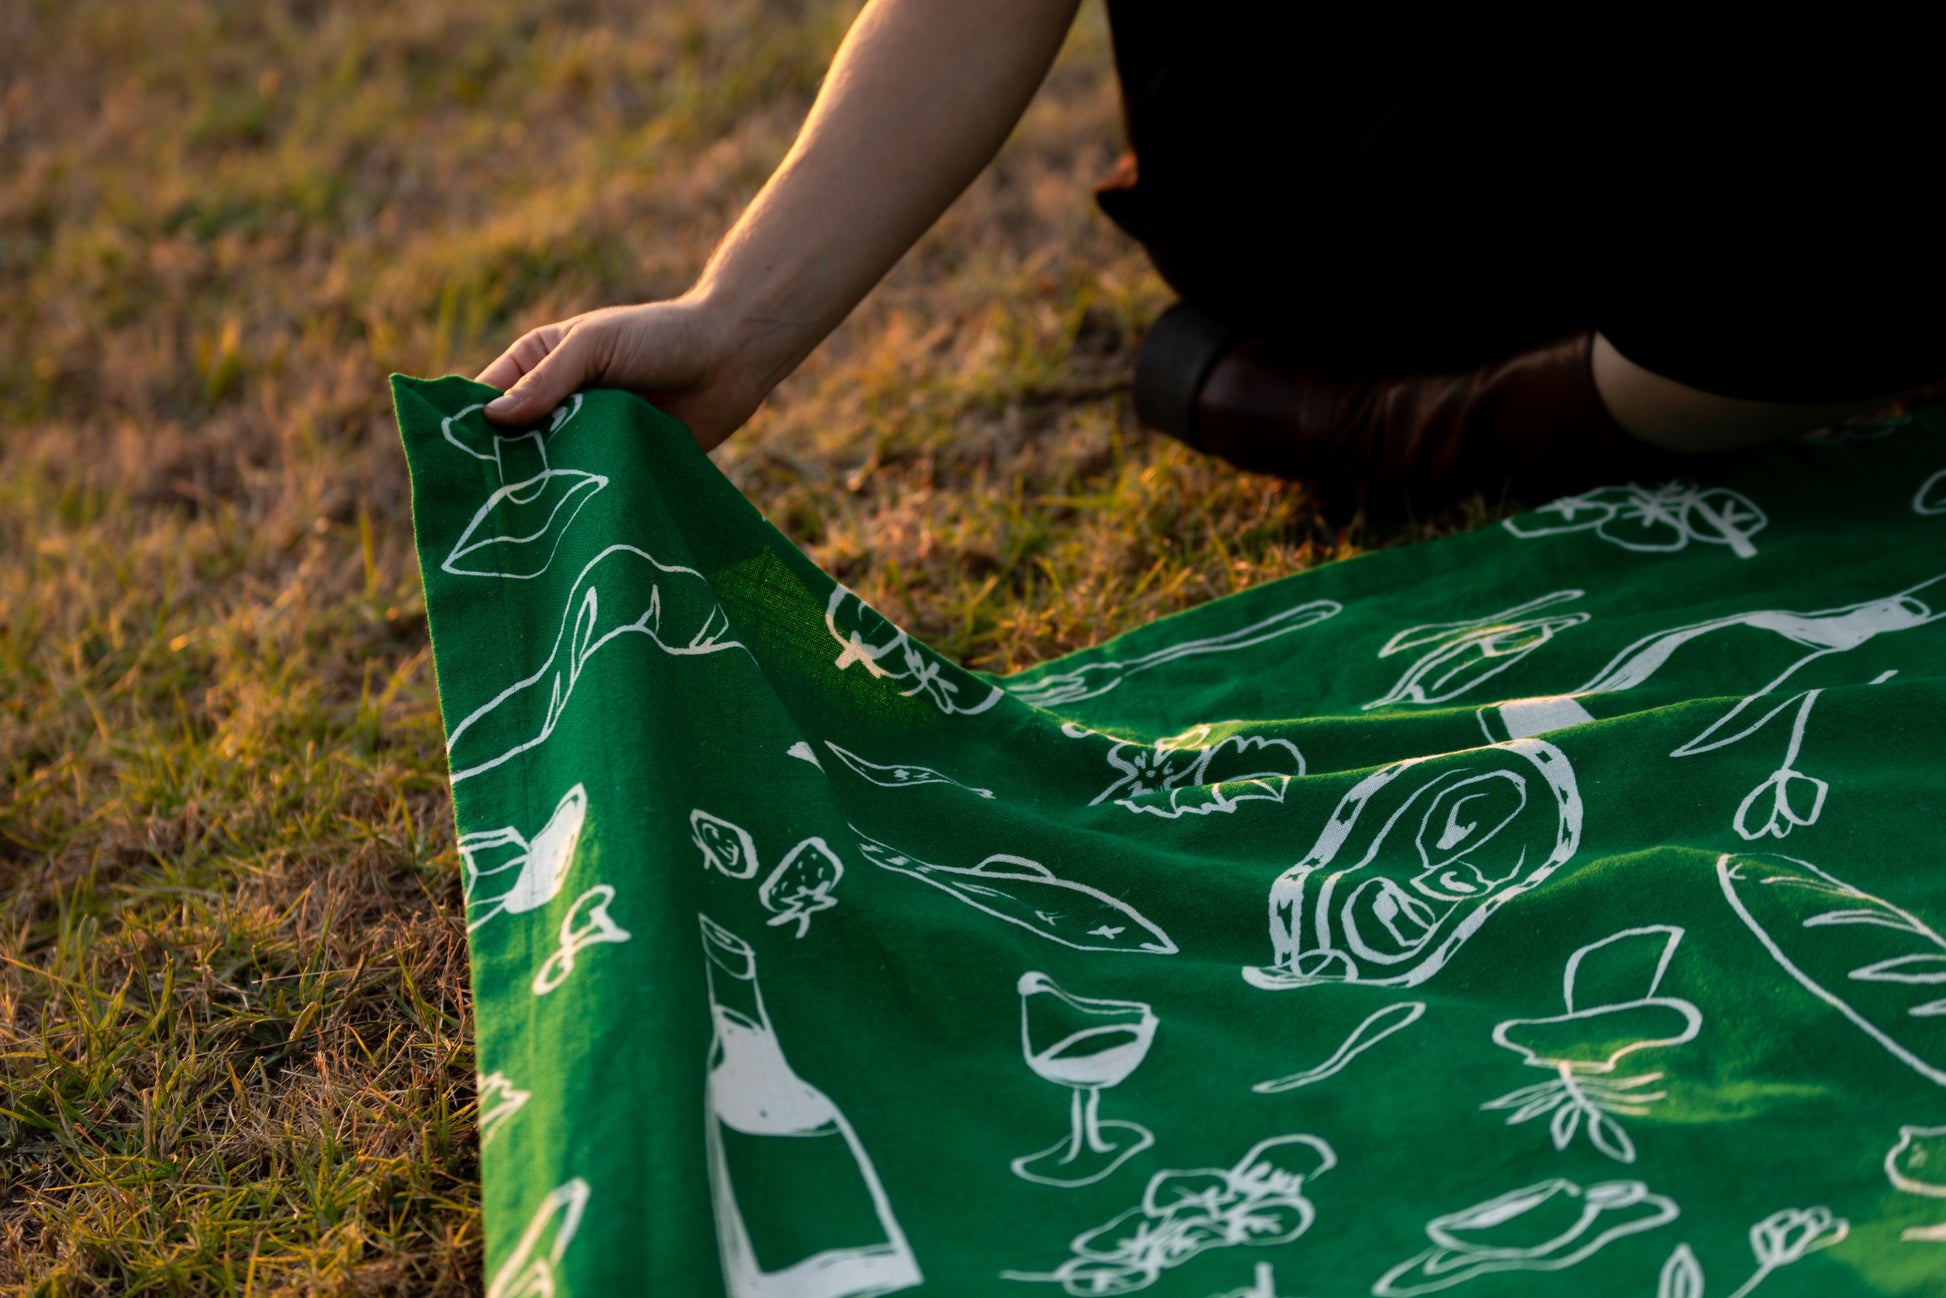 close up of the green tablecloth showing the angle of the fabric